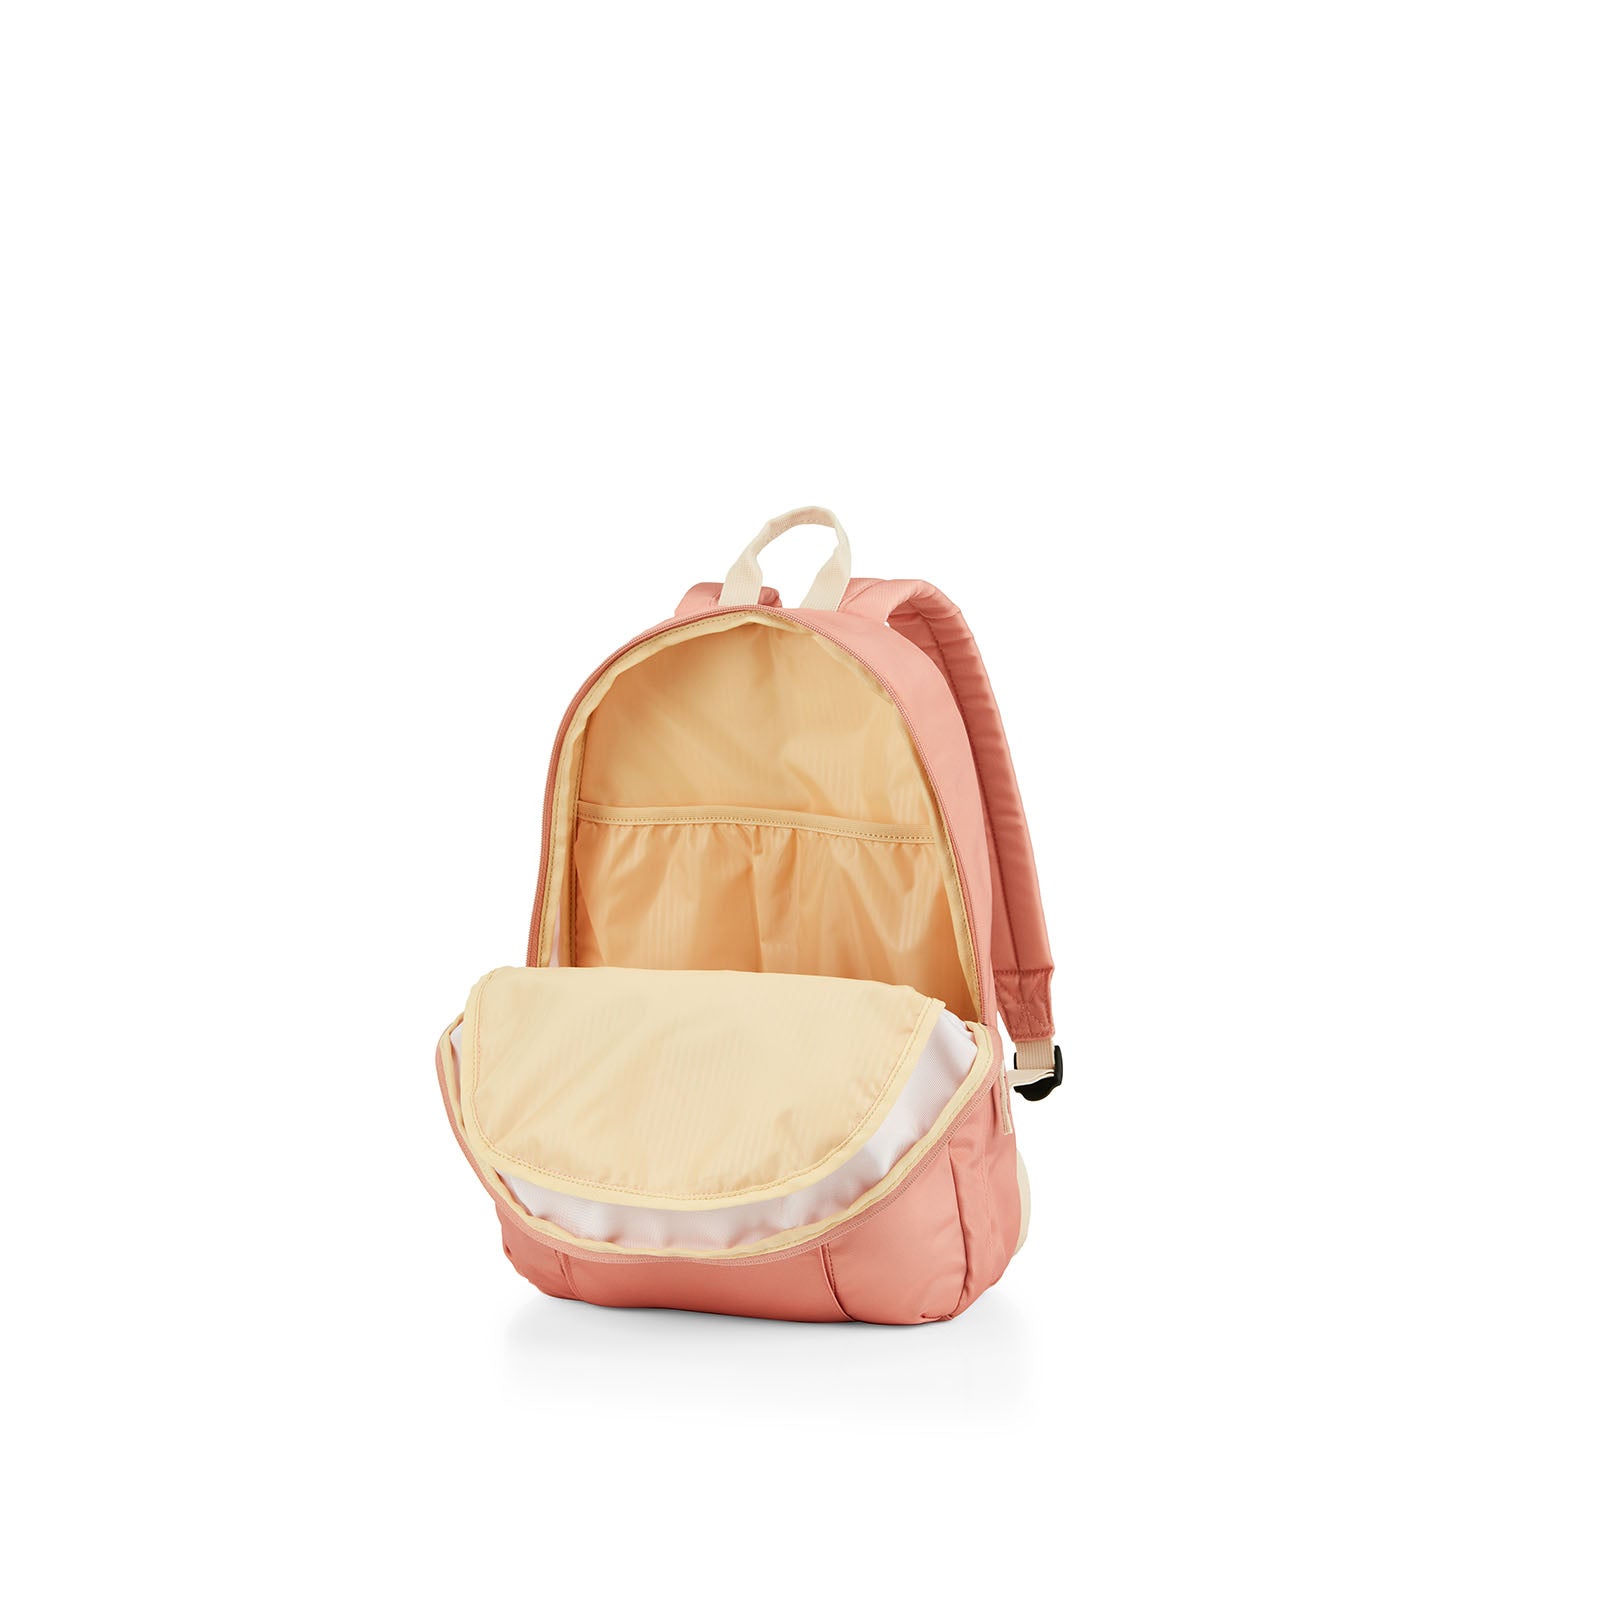 American-Tourister-Rudy-Everyday-Backpack-Apricot-Ice-Open